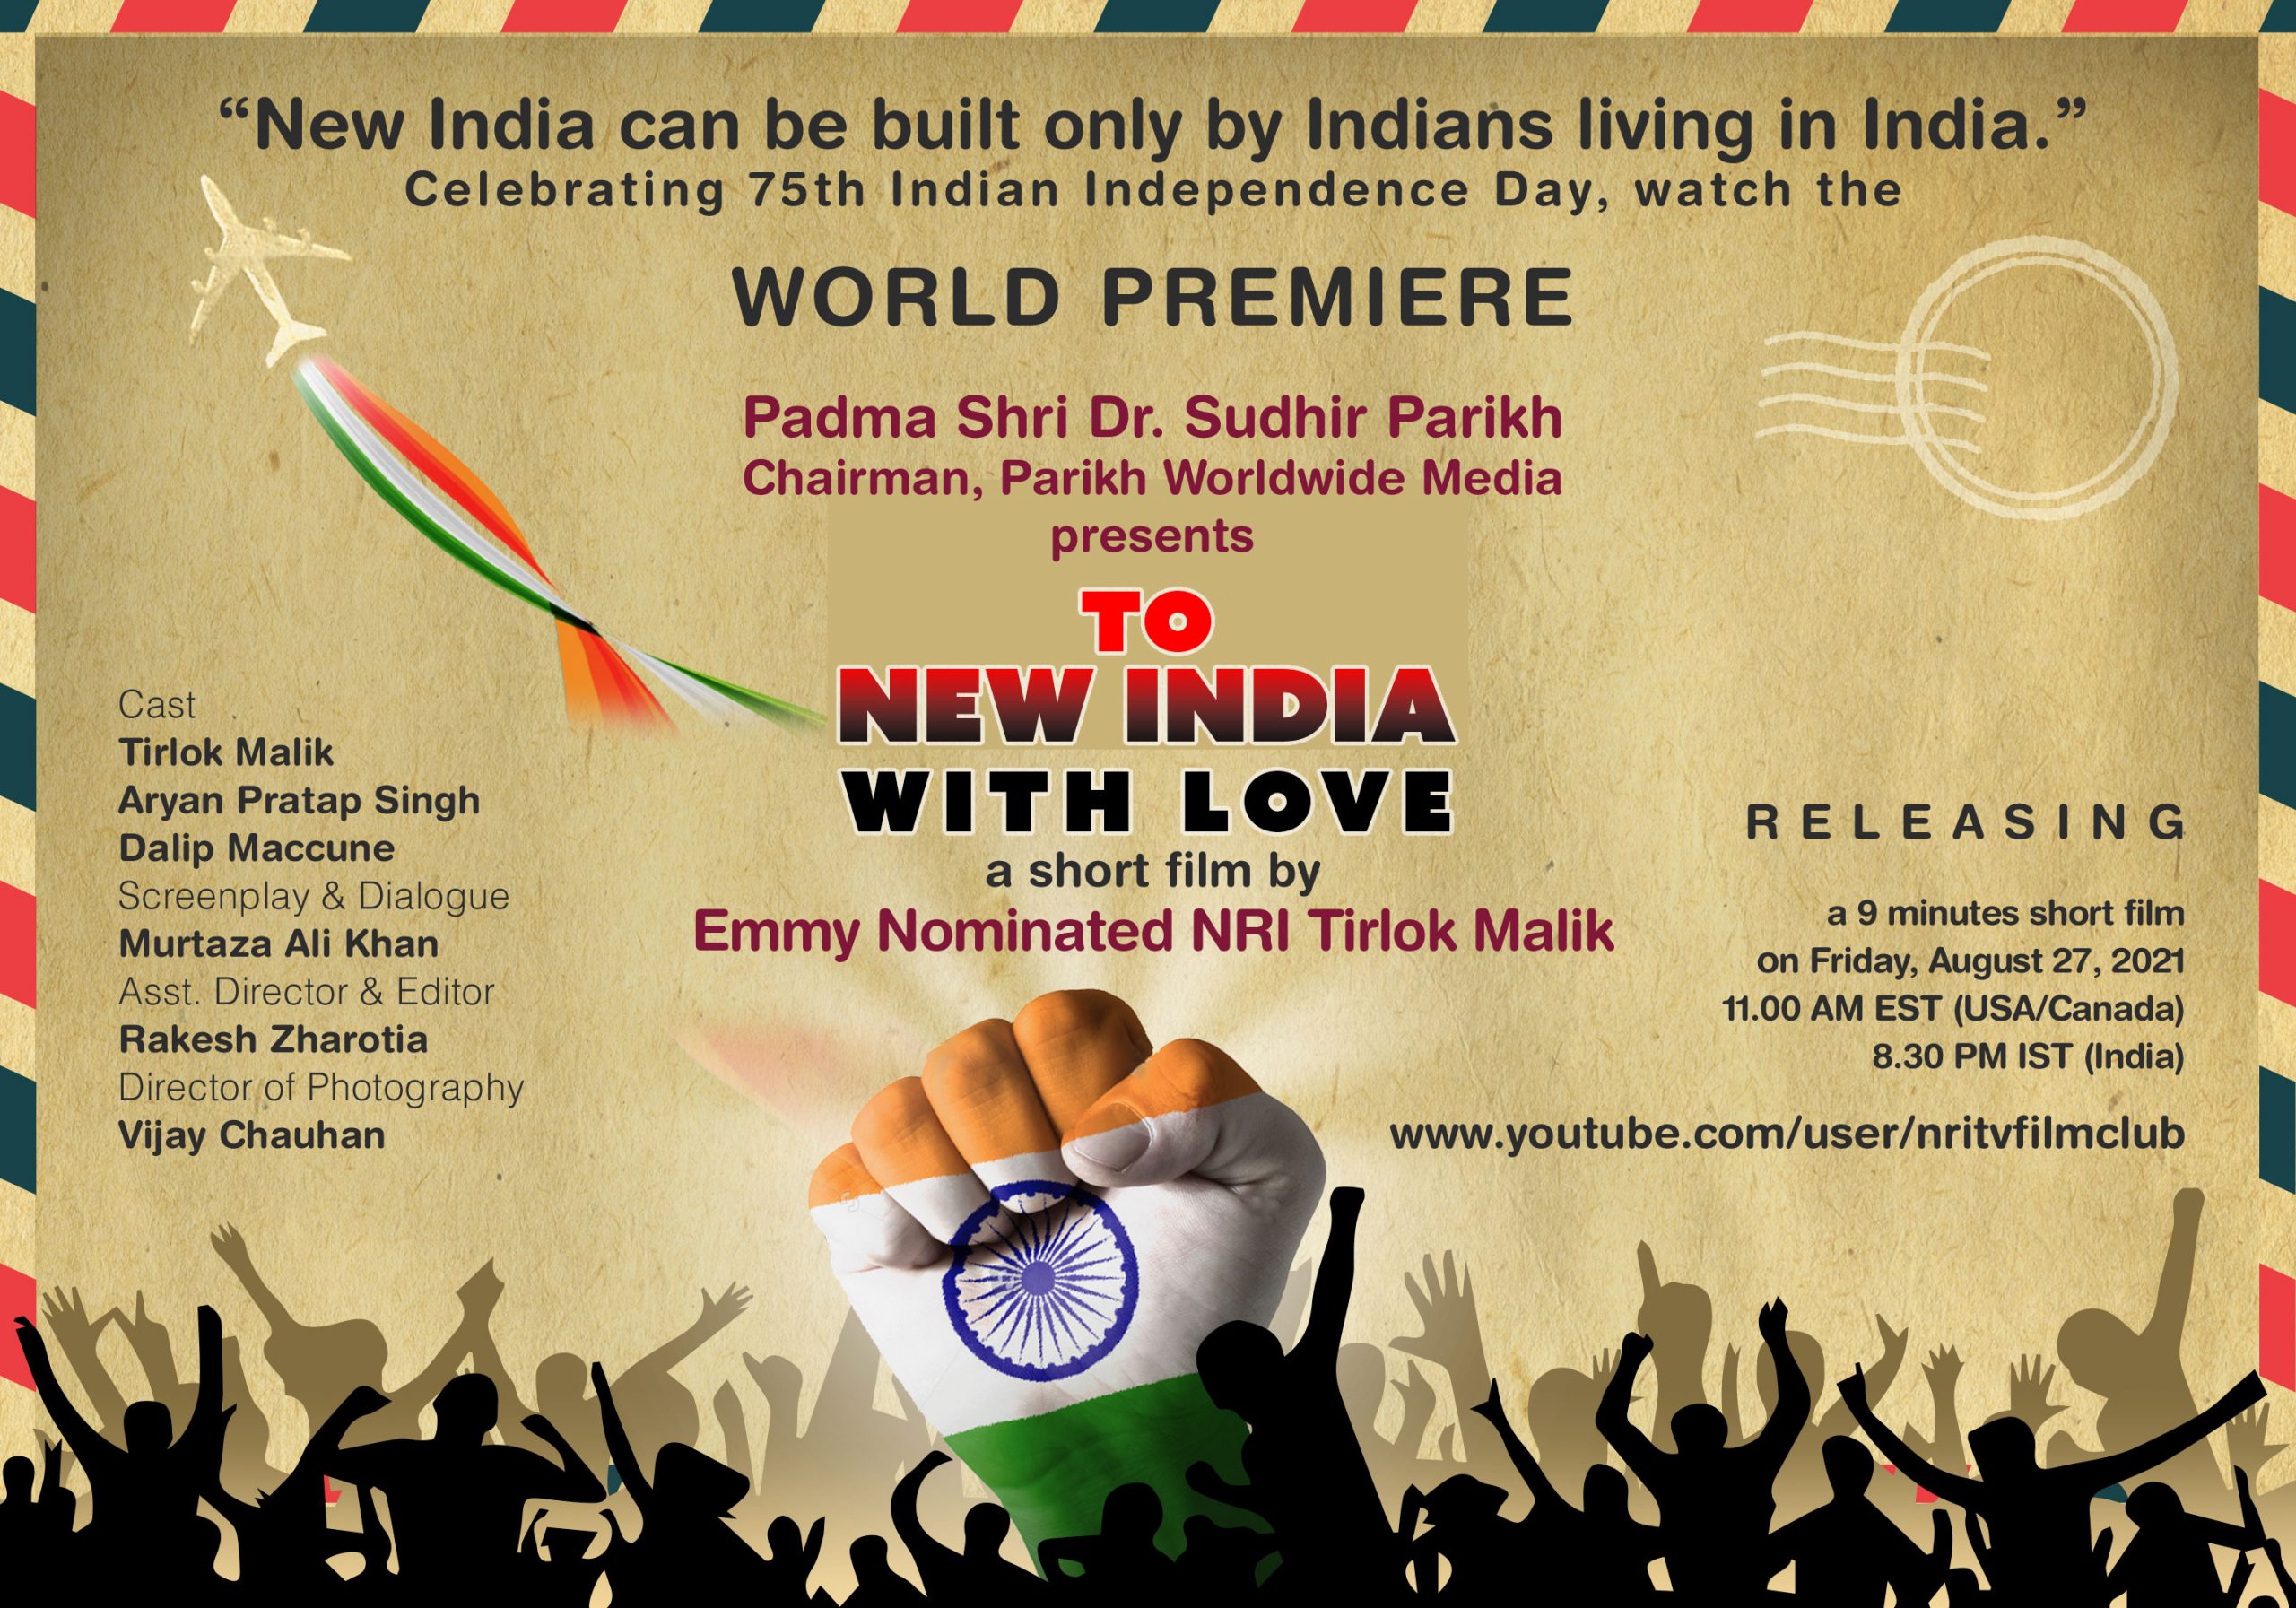 To New India with Love by Emmy Nominated NRI Tirlok Malik